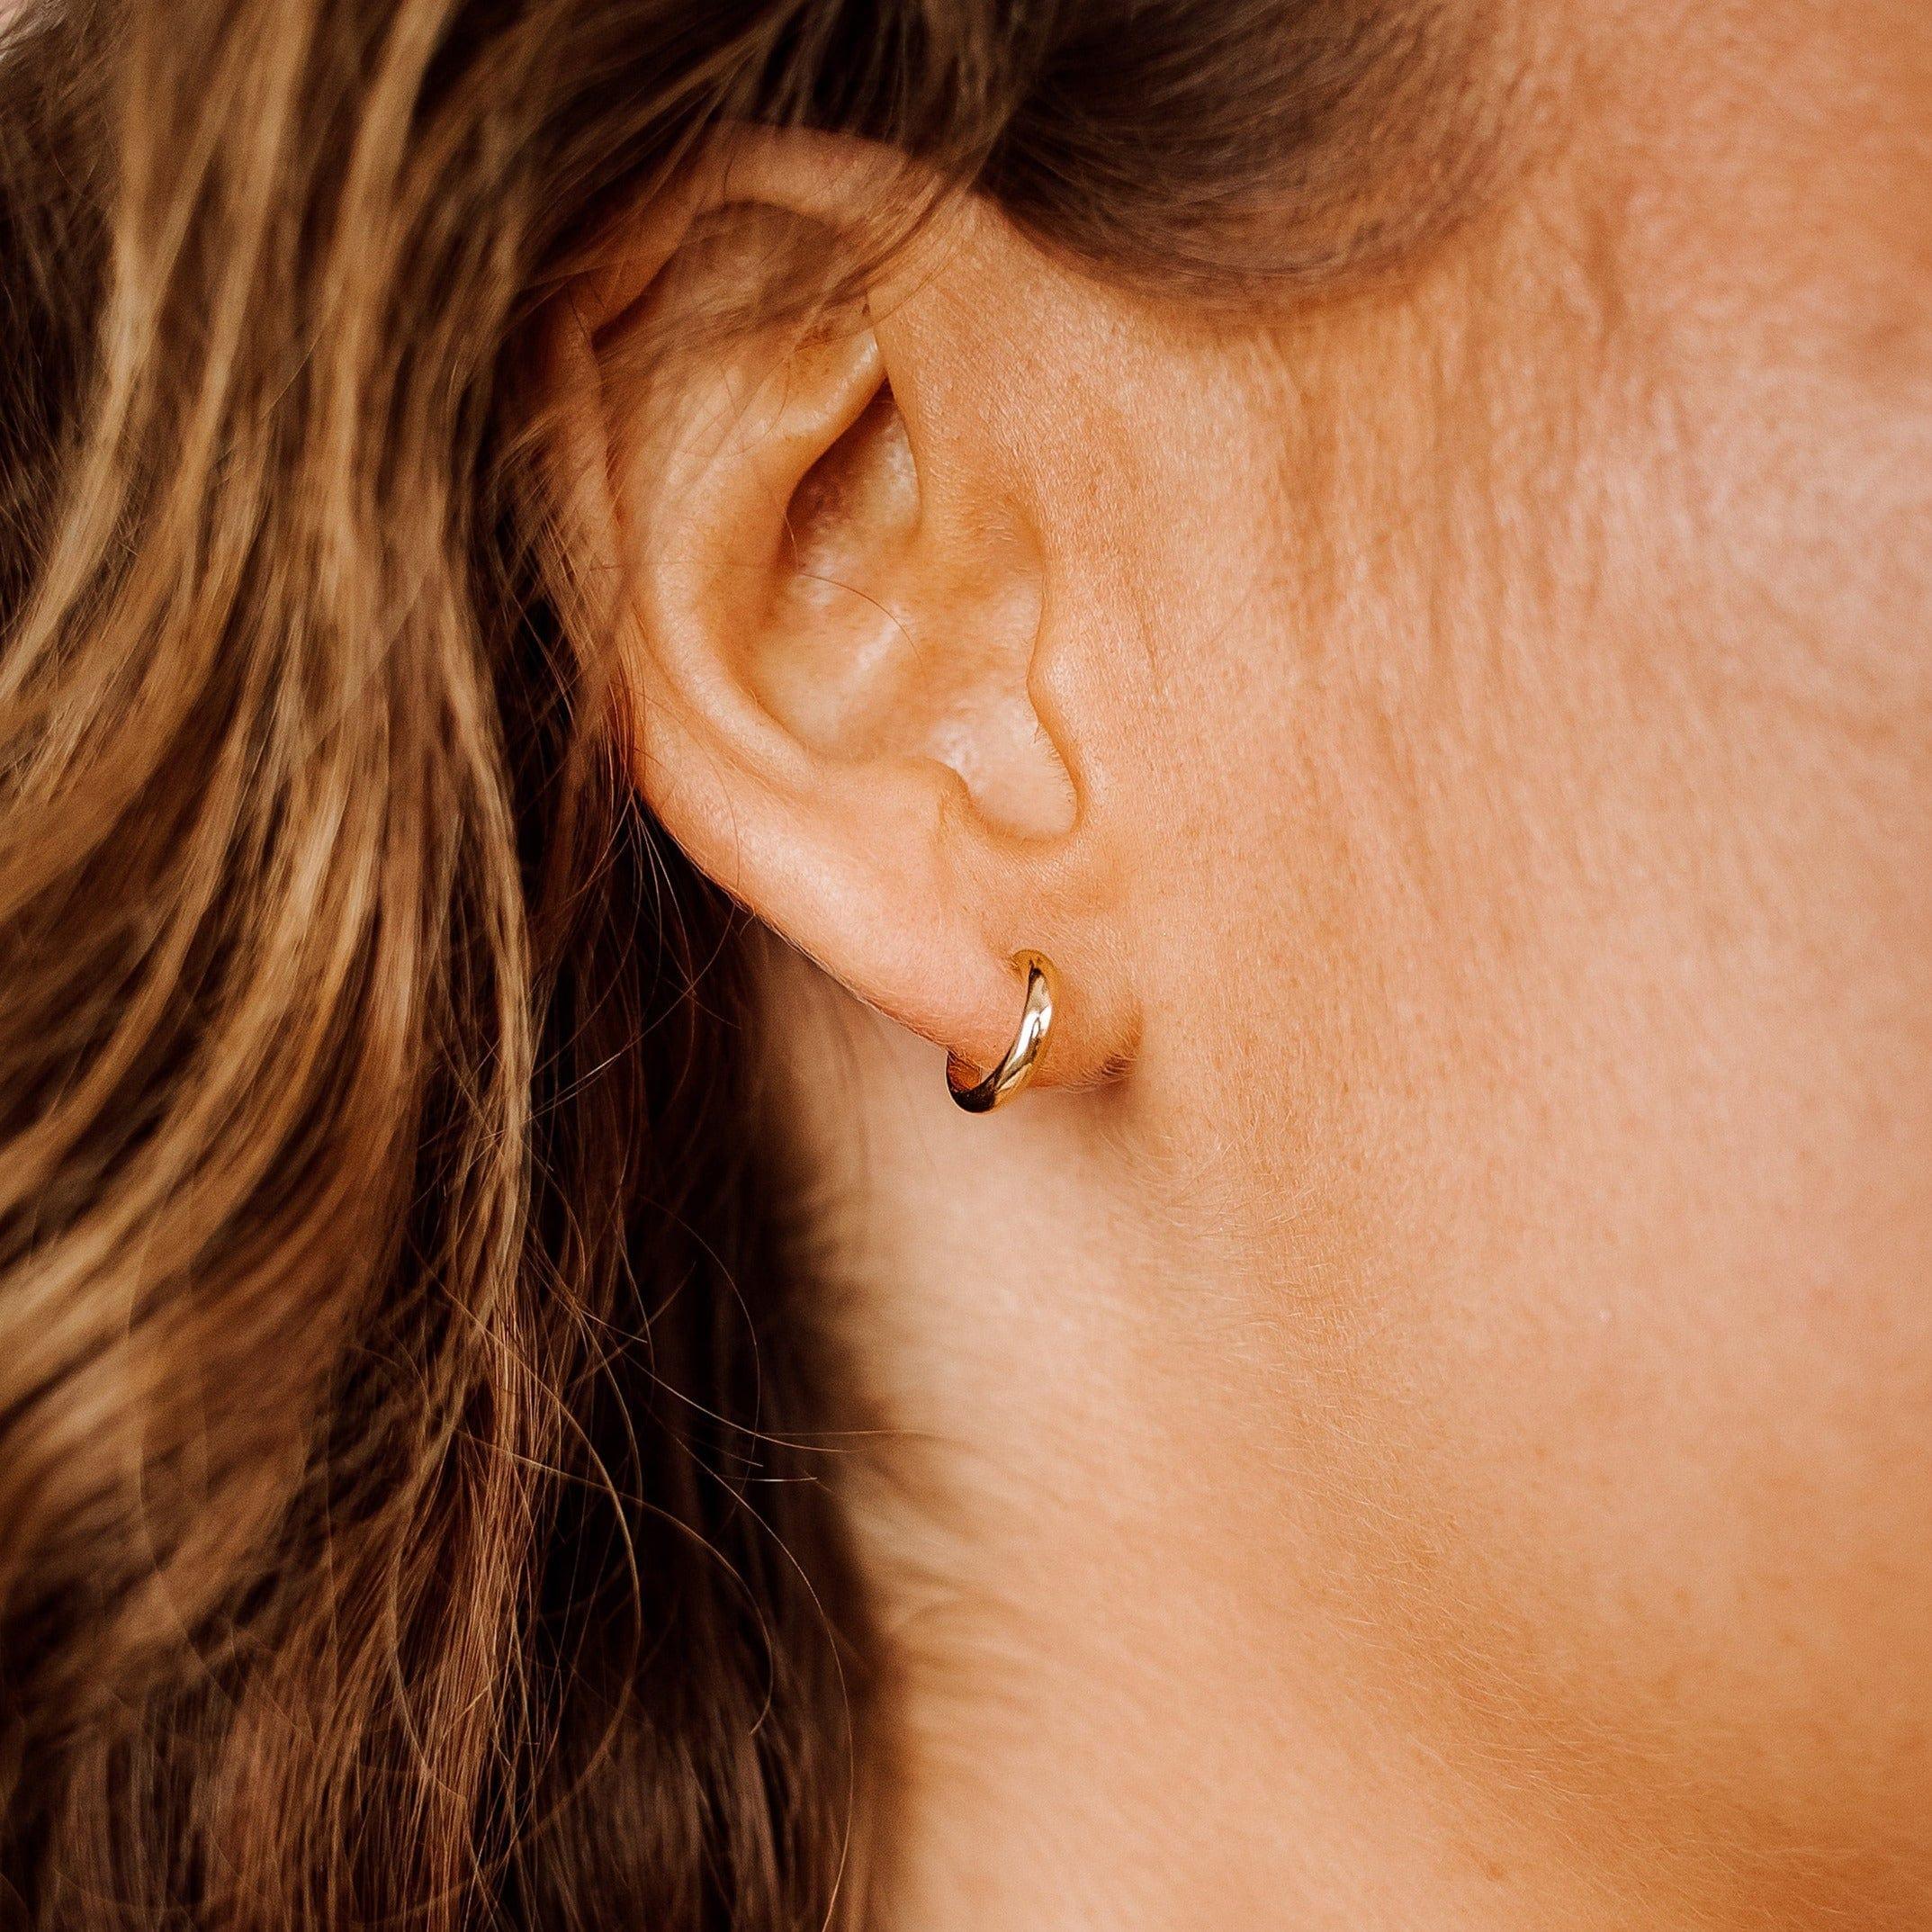 Tiny Elle Hoop Earrings - Nolia Jewelry - Meaningful + Sustainably Handcrafted Jewelry